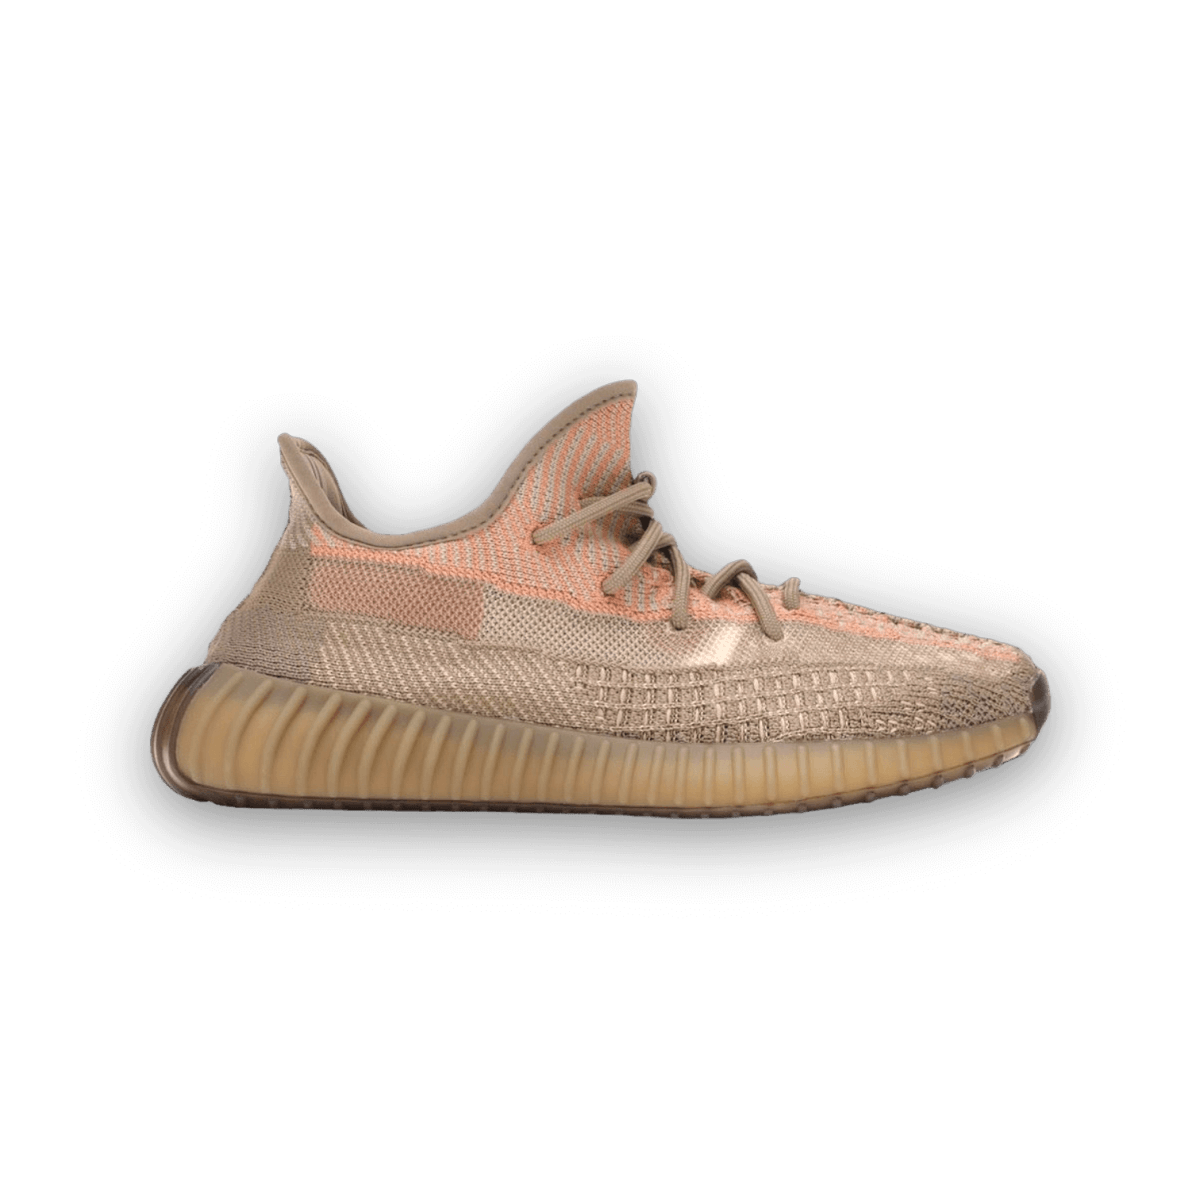 Yeezy Boost 350 V2 Sand Taupe - Low Sneaker - Yeezy - Jawns on Fire